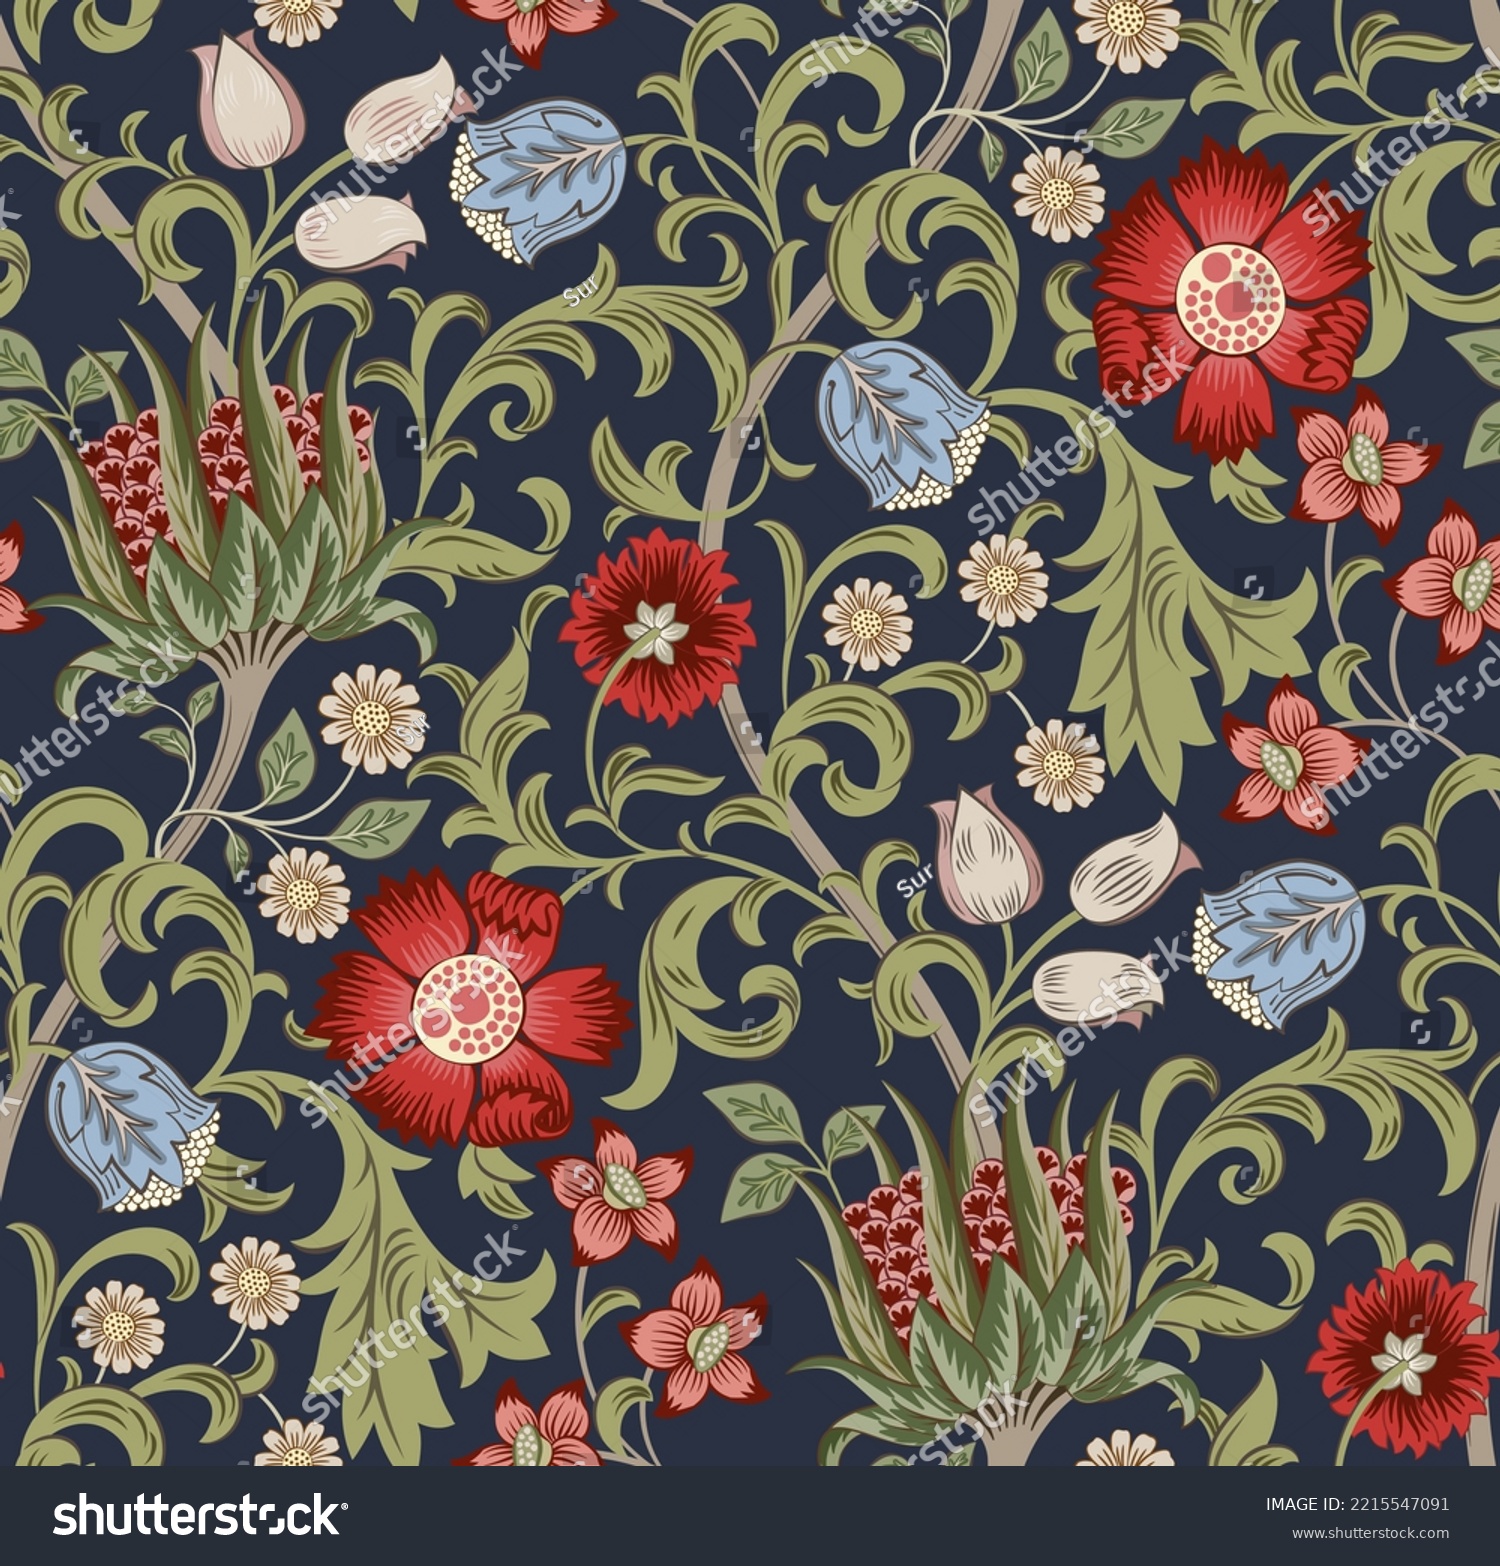 Floral seamless pattern with field of flowers on dark blue background. Vector illustration. #2215547091